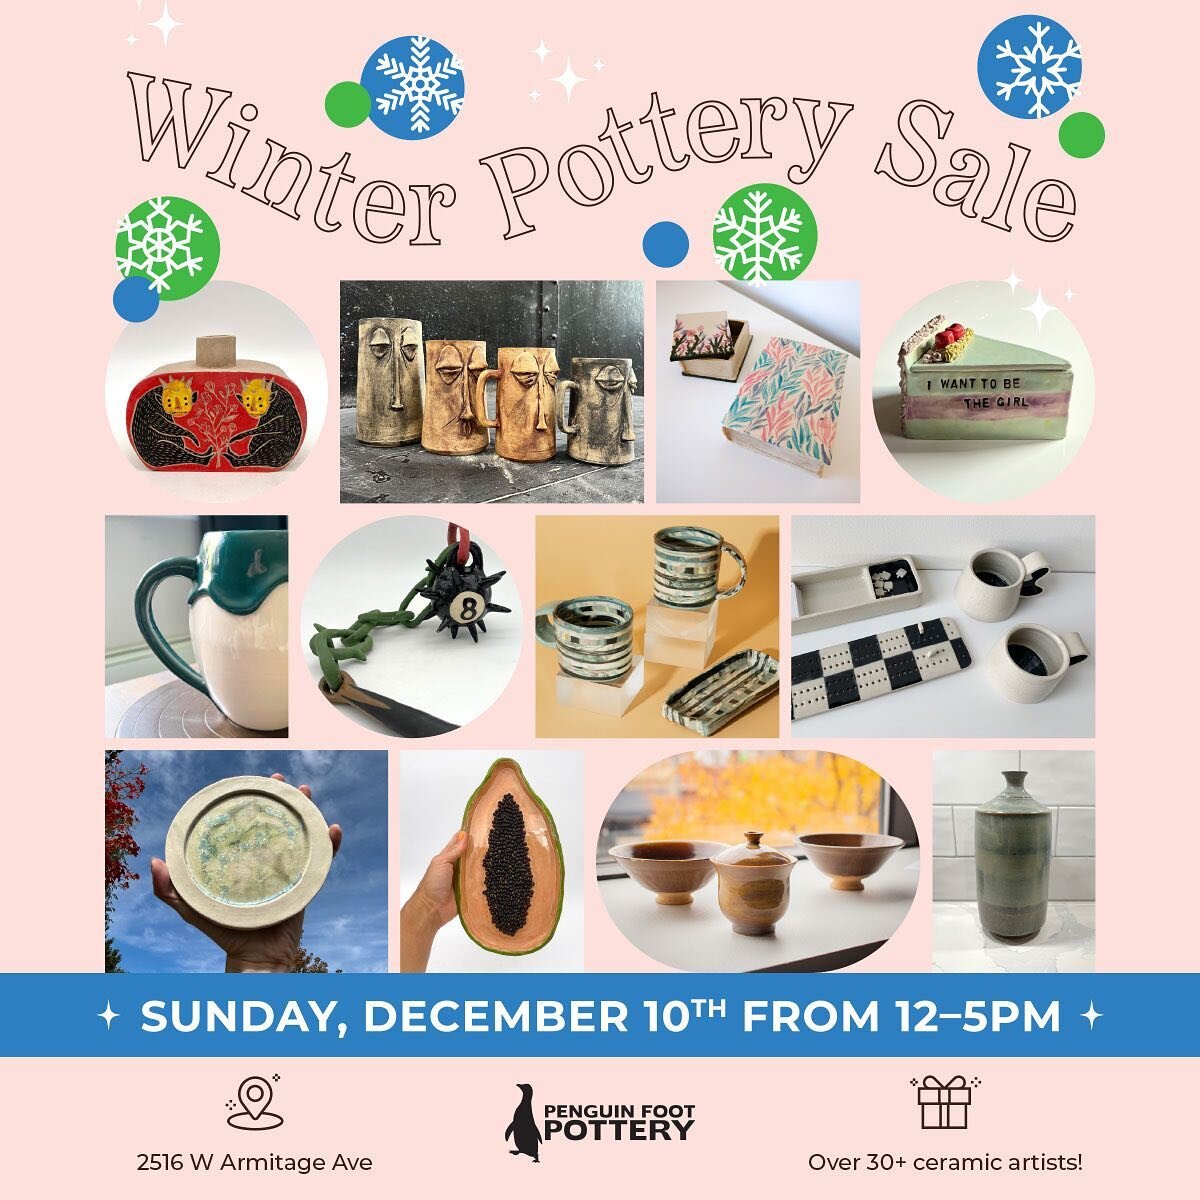 Swing by on Sunday, December 10th to get all your holiday shopping done! Over 30 artists will be selling their wares and this lineup is 🔥. 12-5! #penguinfootfam